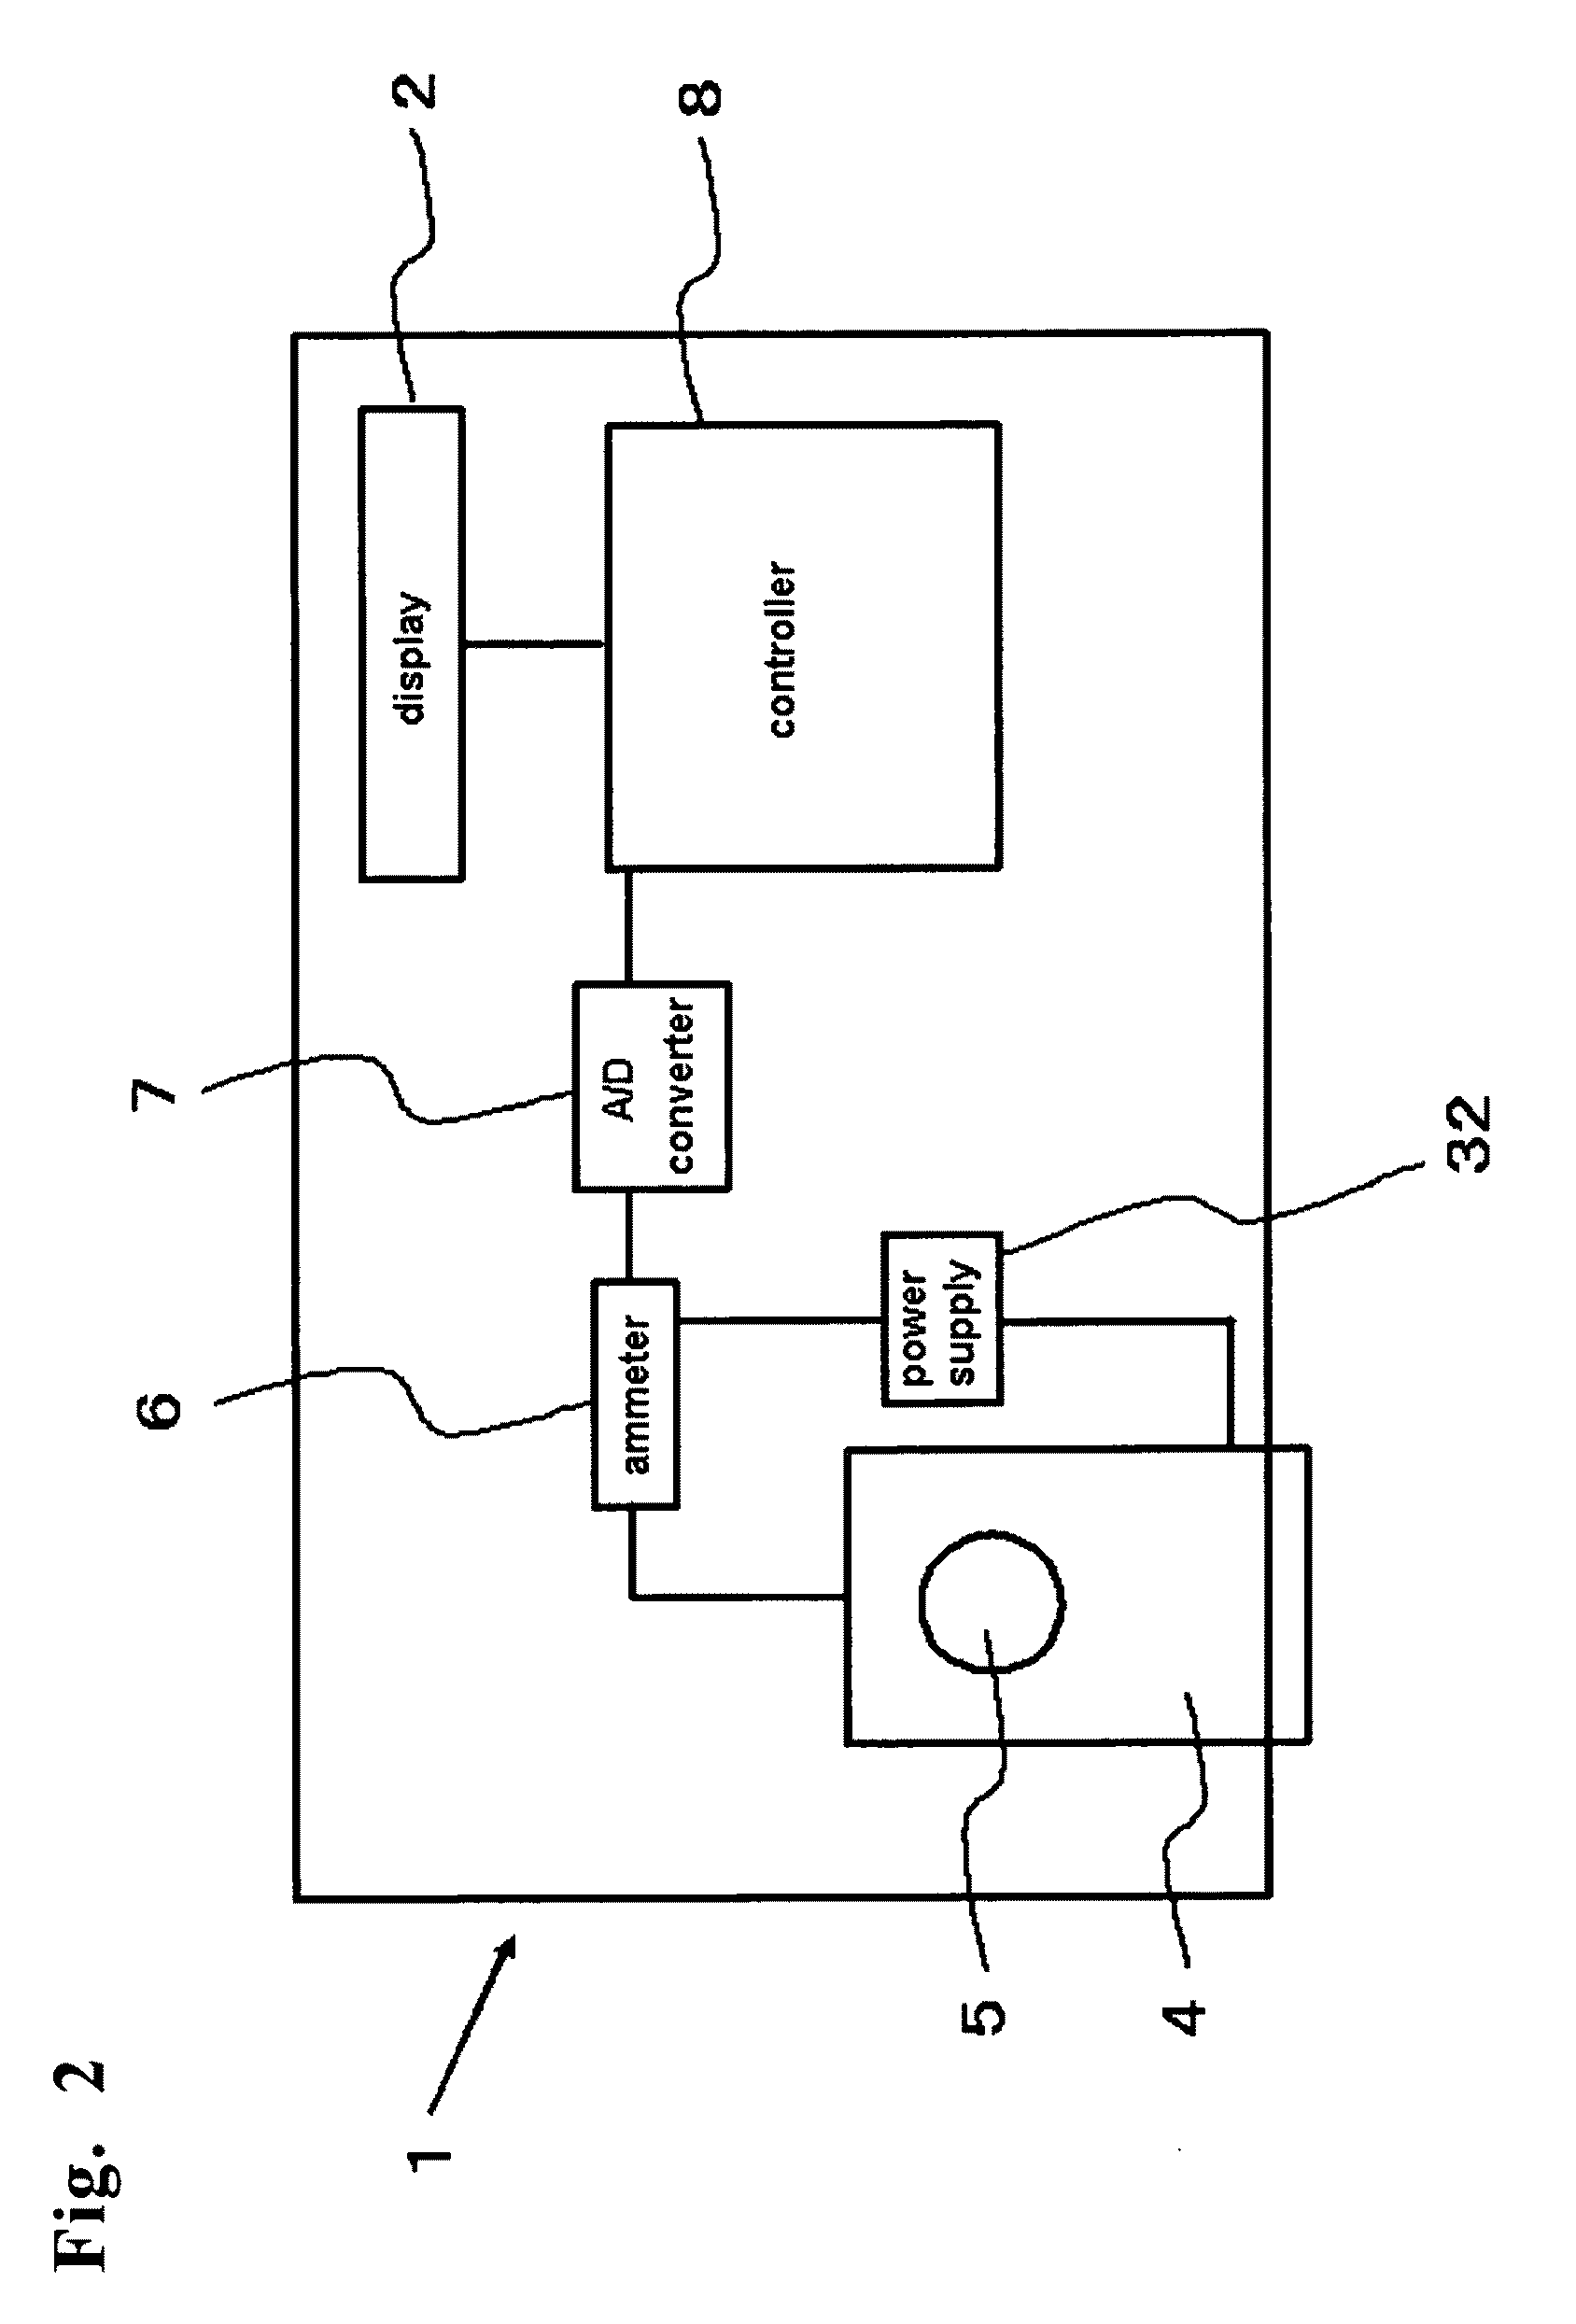 Test chip, detection apparatus, and method for detecting analyte